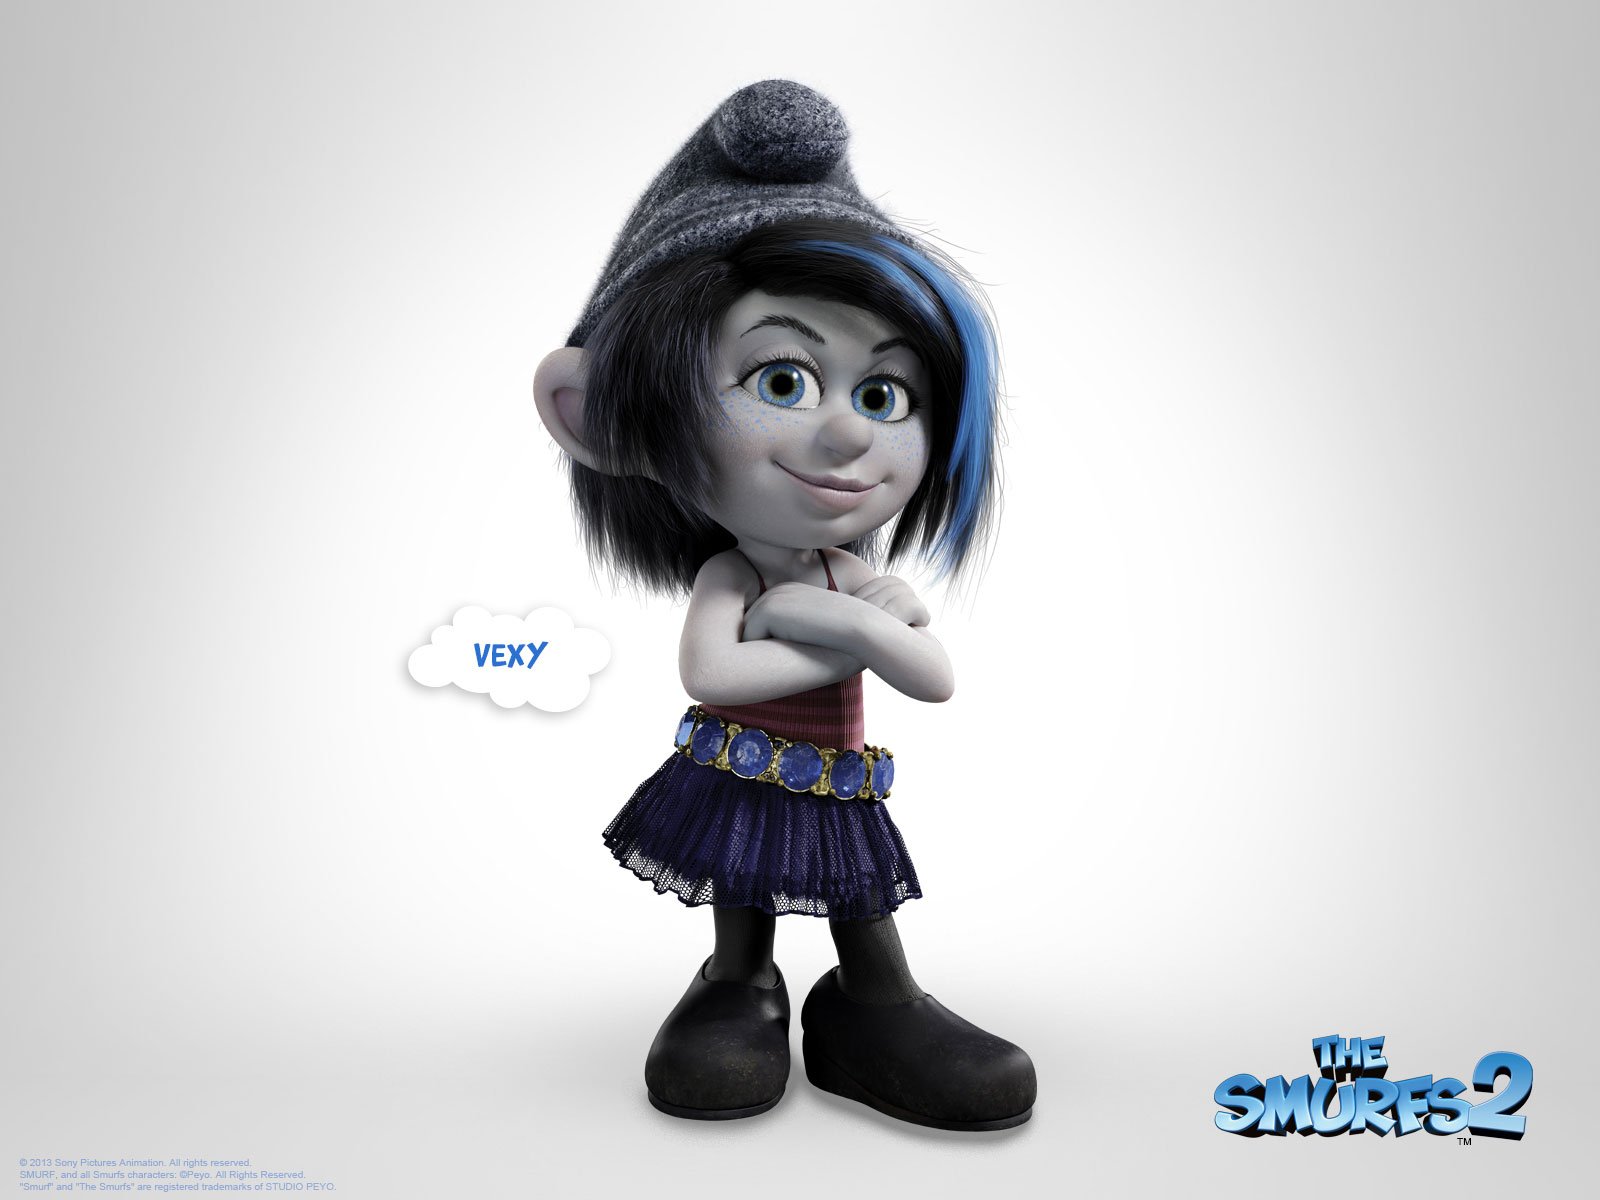 The Smurfs 2 - Buy On Digital Now Buy on Blu-ray Combo